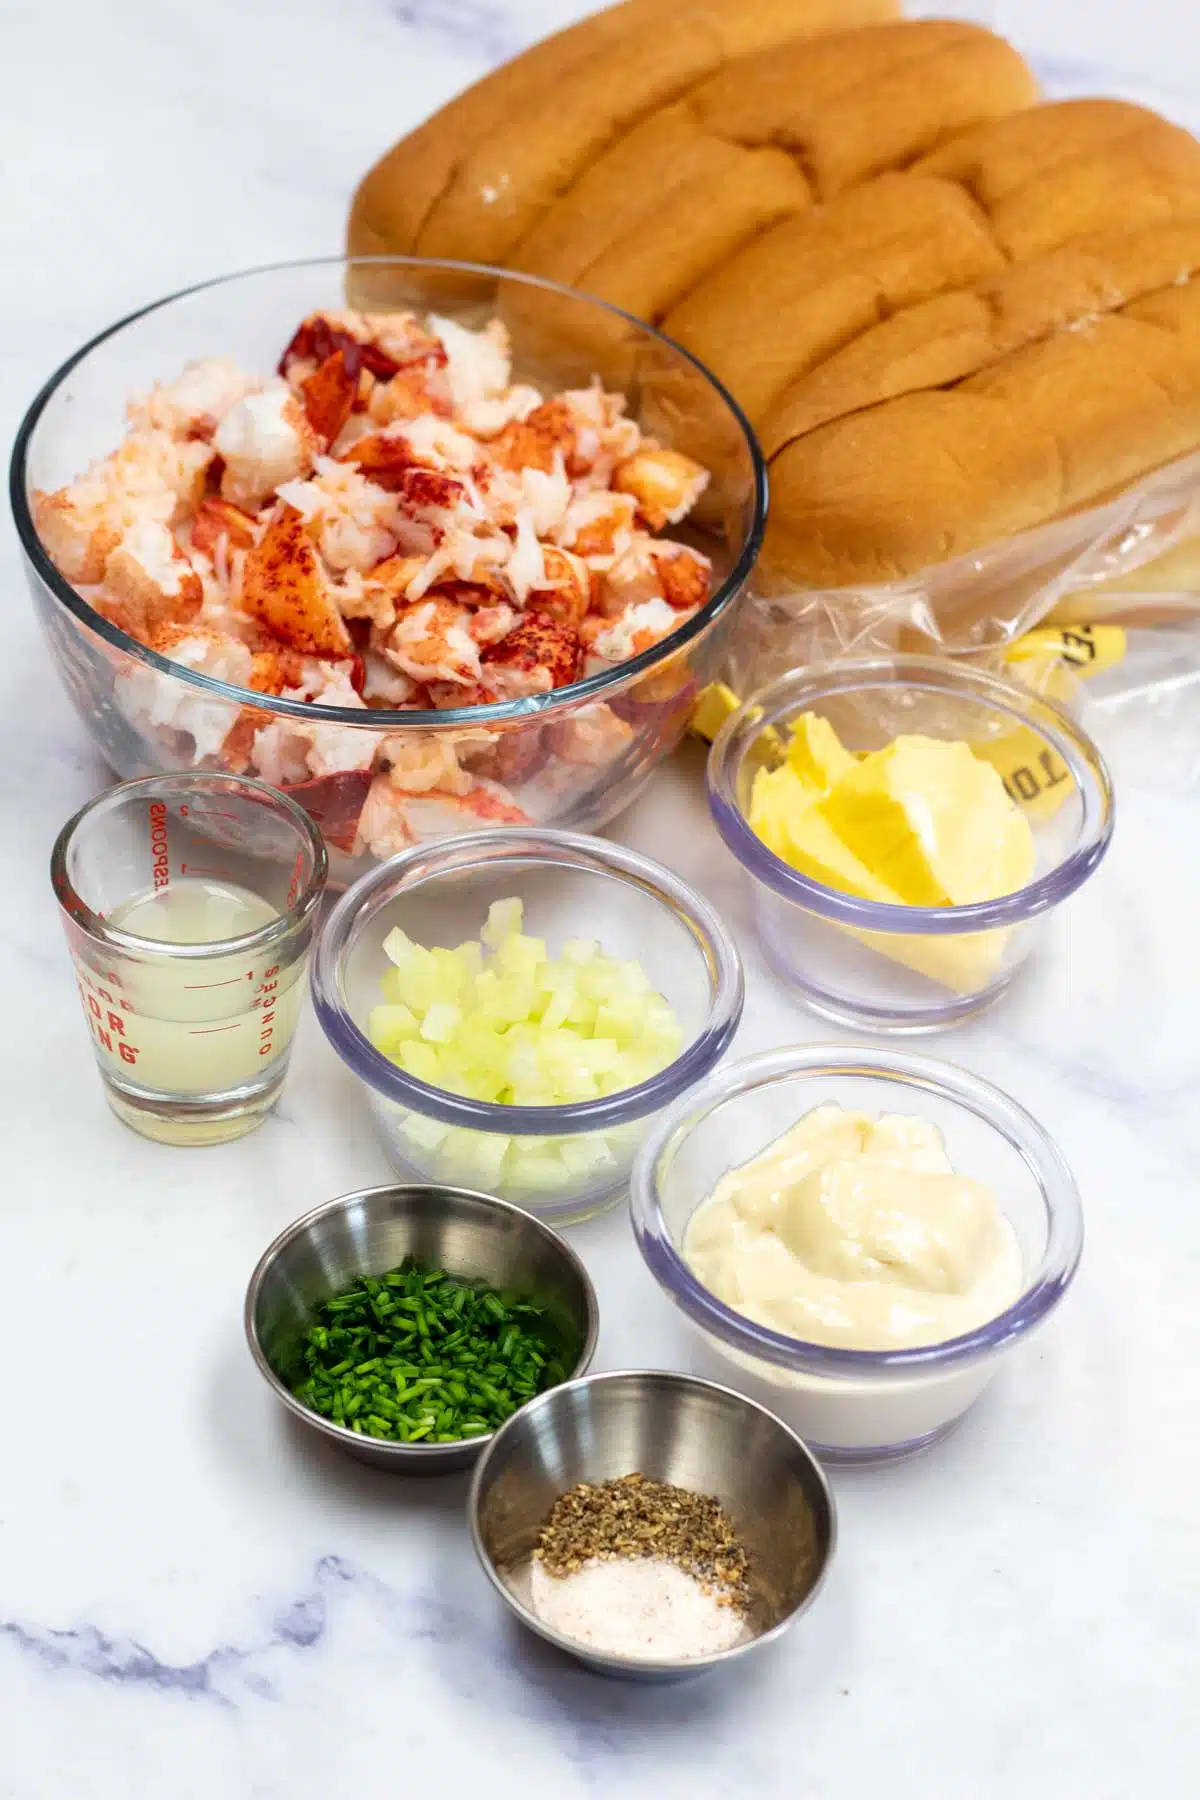 Tall image showing lobster roll ingredients.